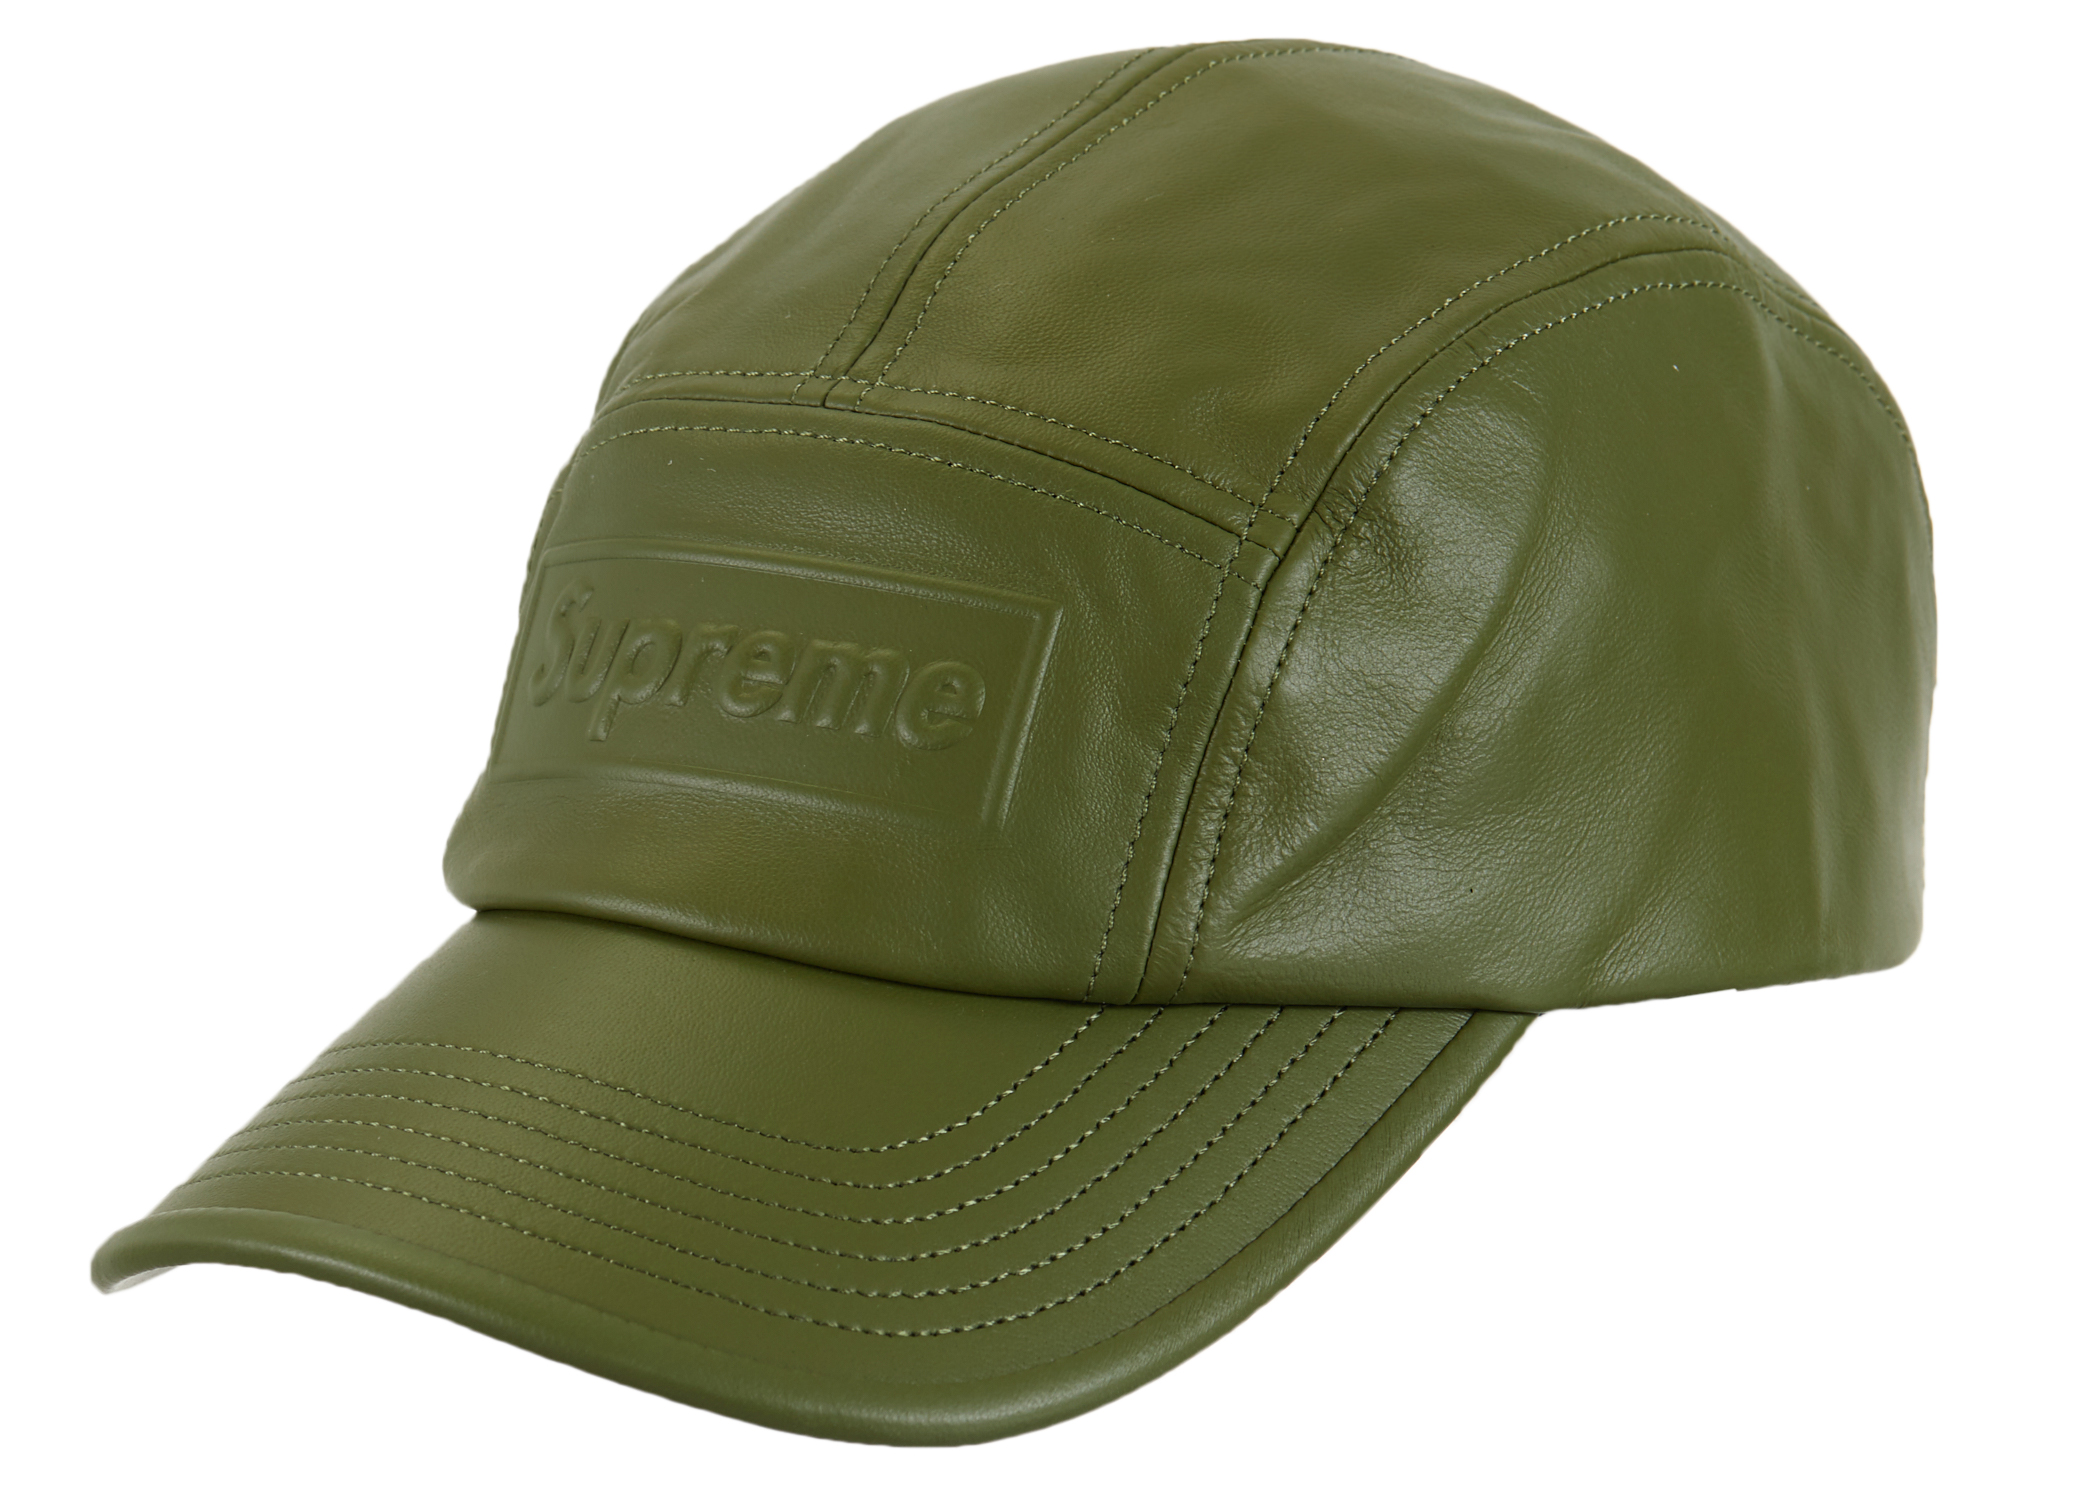 Supreme Expedition Leather Visor Camp Cap Stone